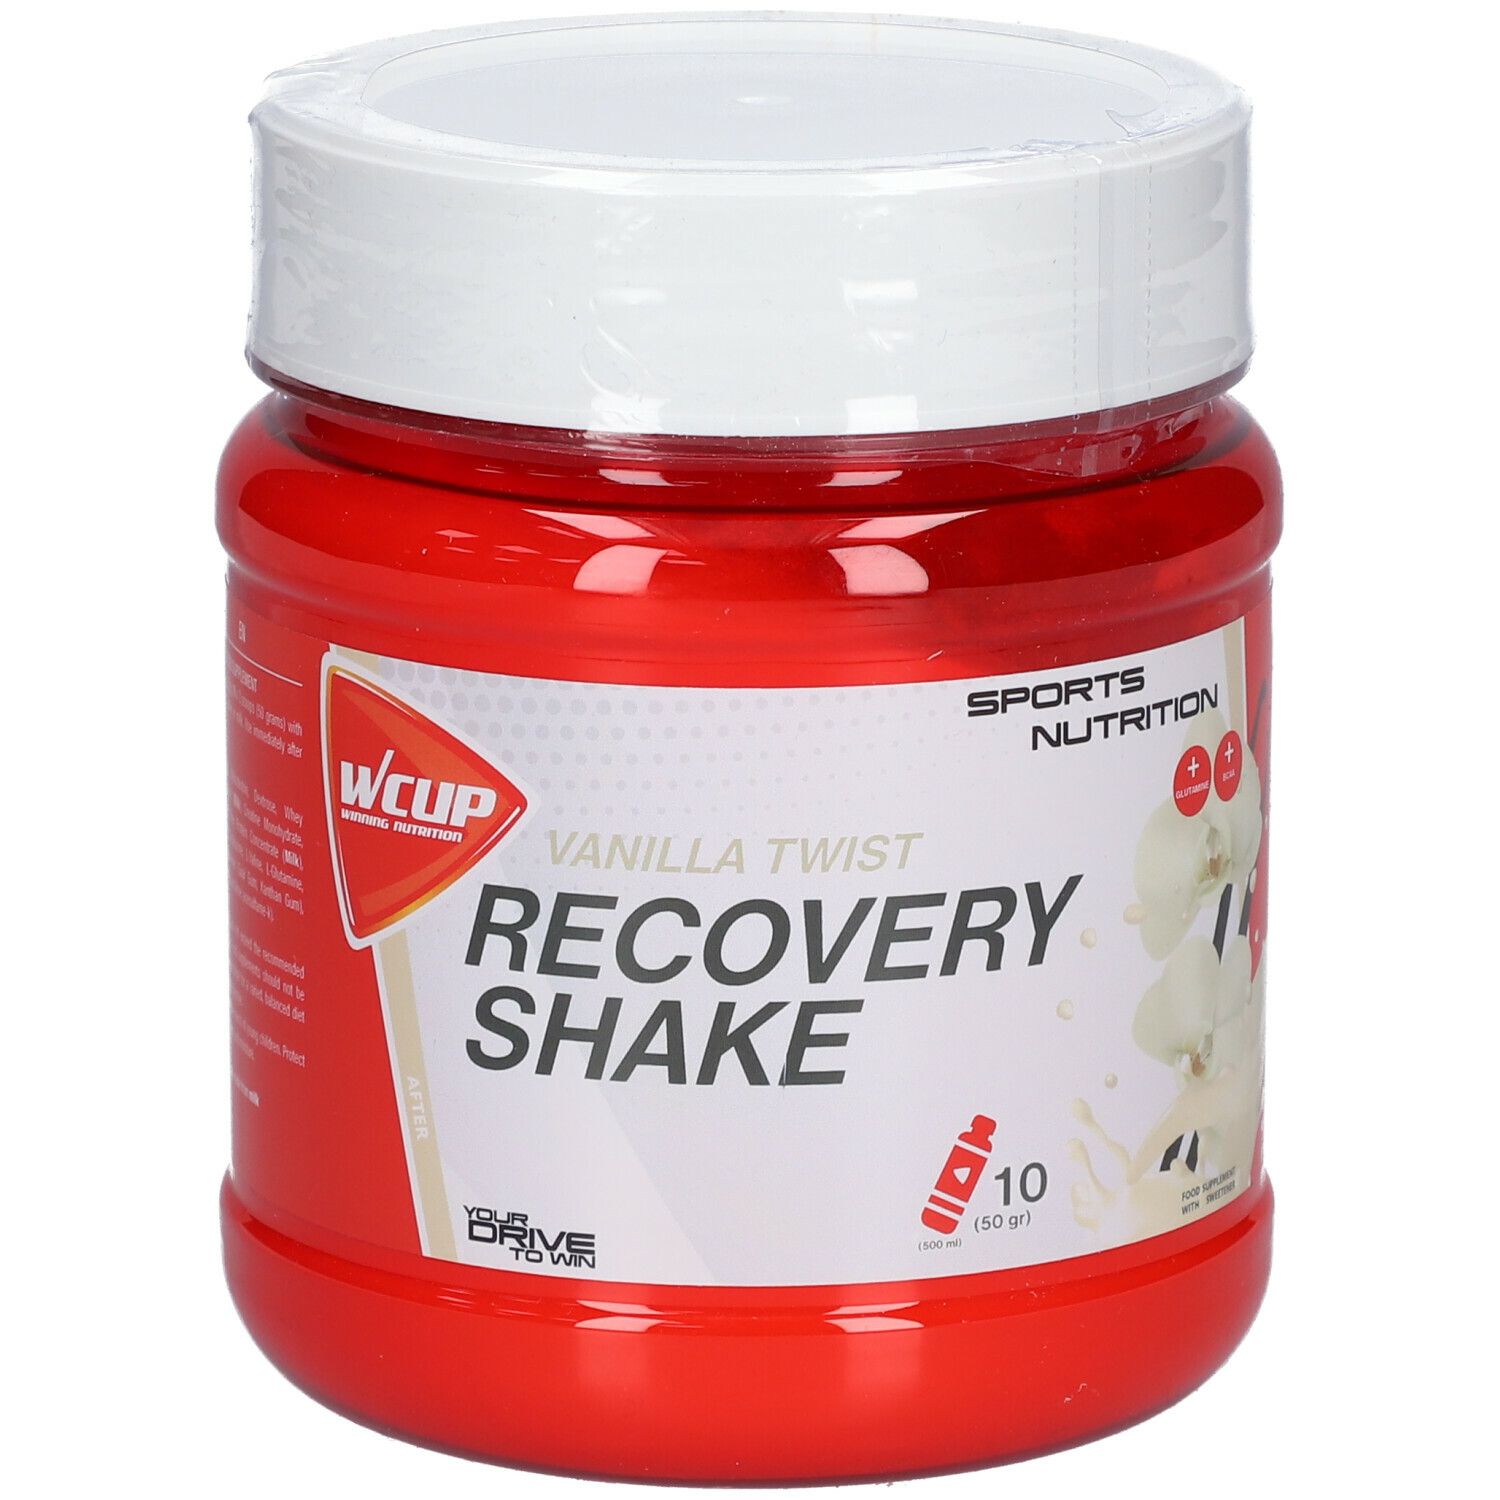 Wcup Recovery Shake Vanille Twist